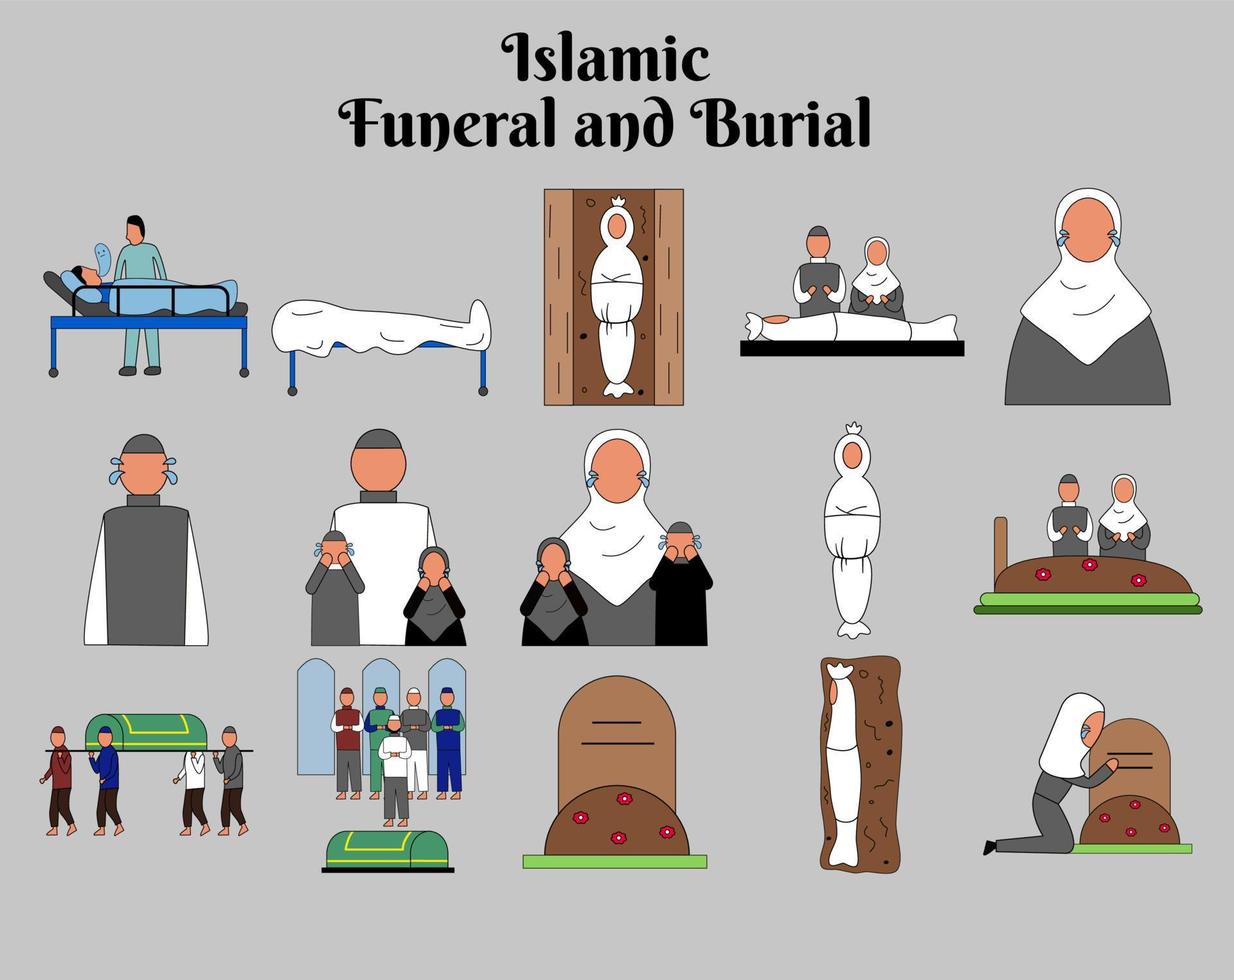 Islamic funeral and burial icon set. Vector collection of funeral activities